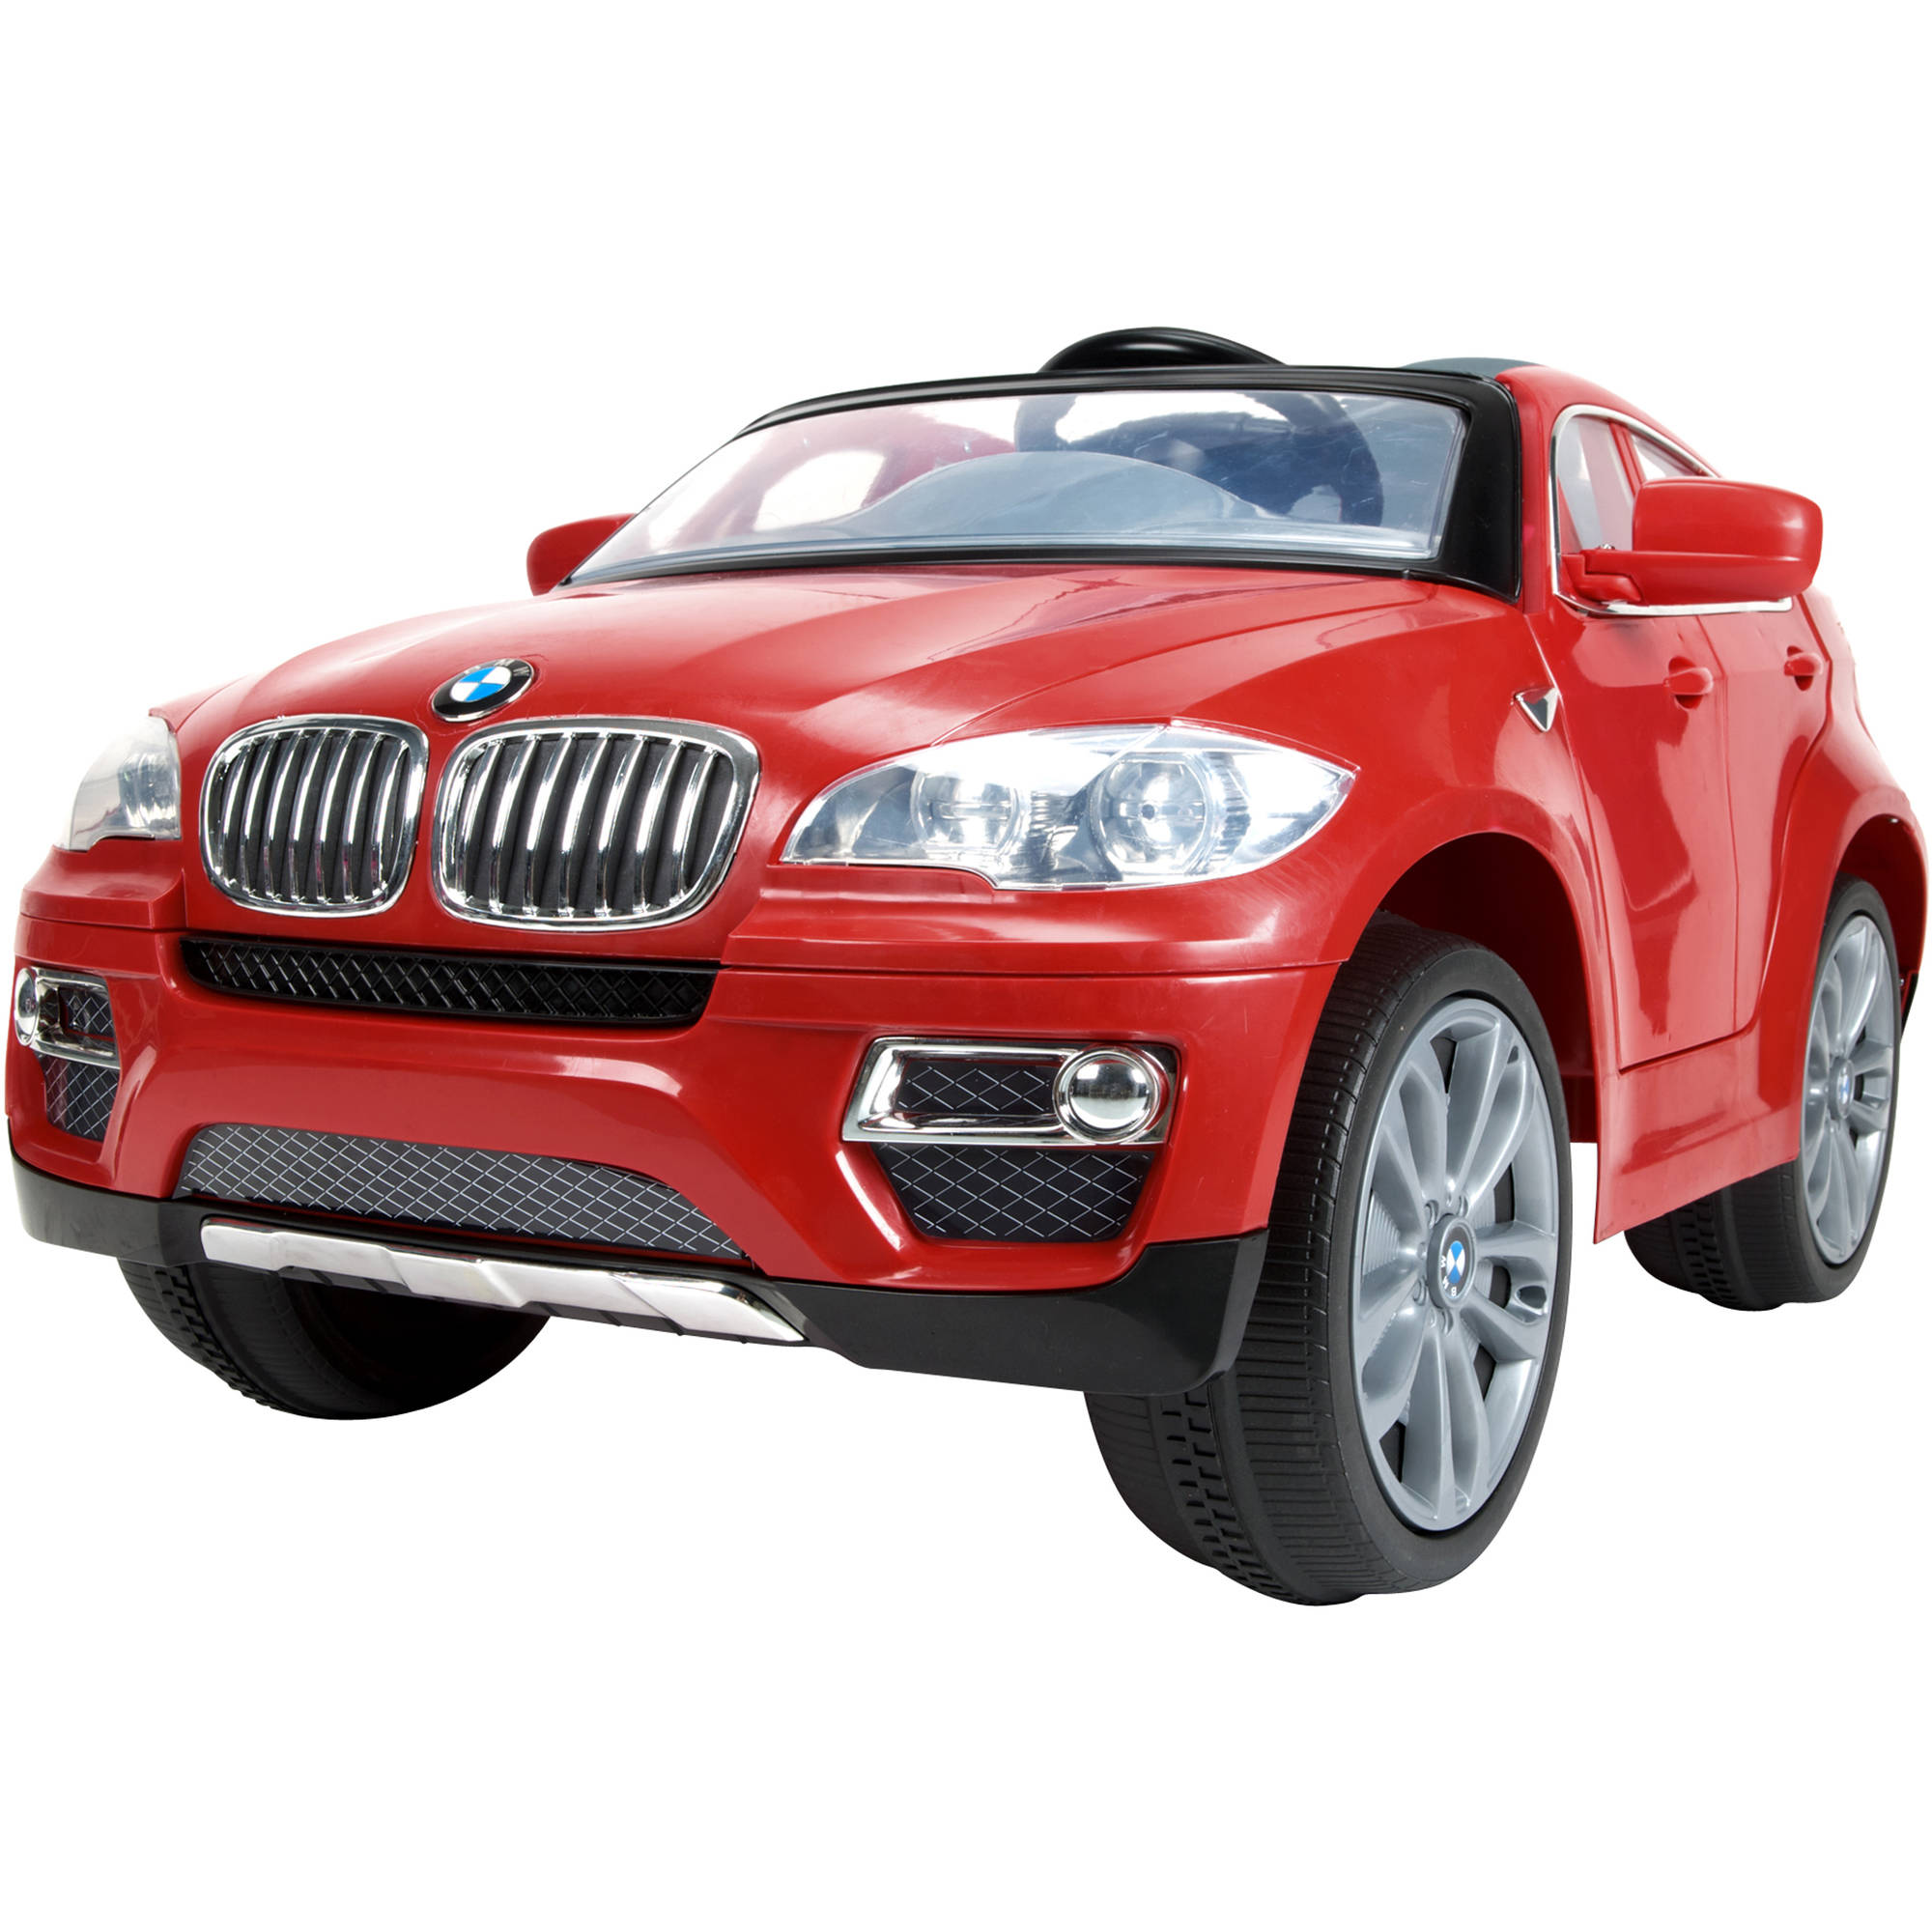 BMW X6 6-Volt Battery-Powered Ride-On Toy Car by Huffy® - image 1 of 3